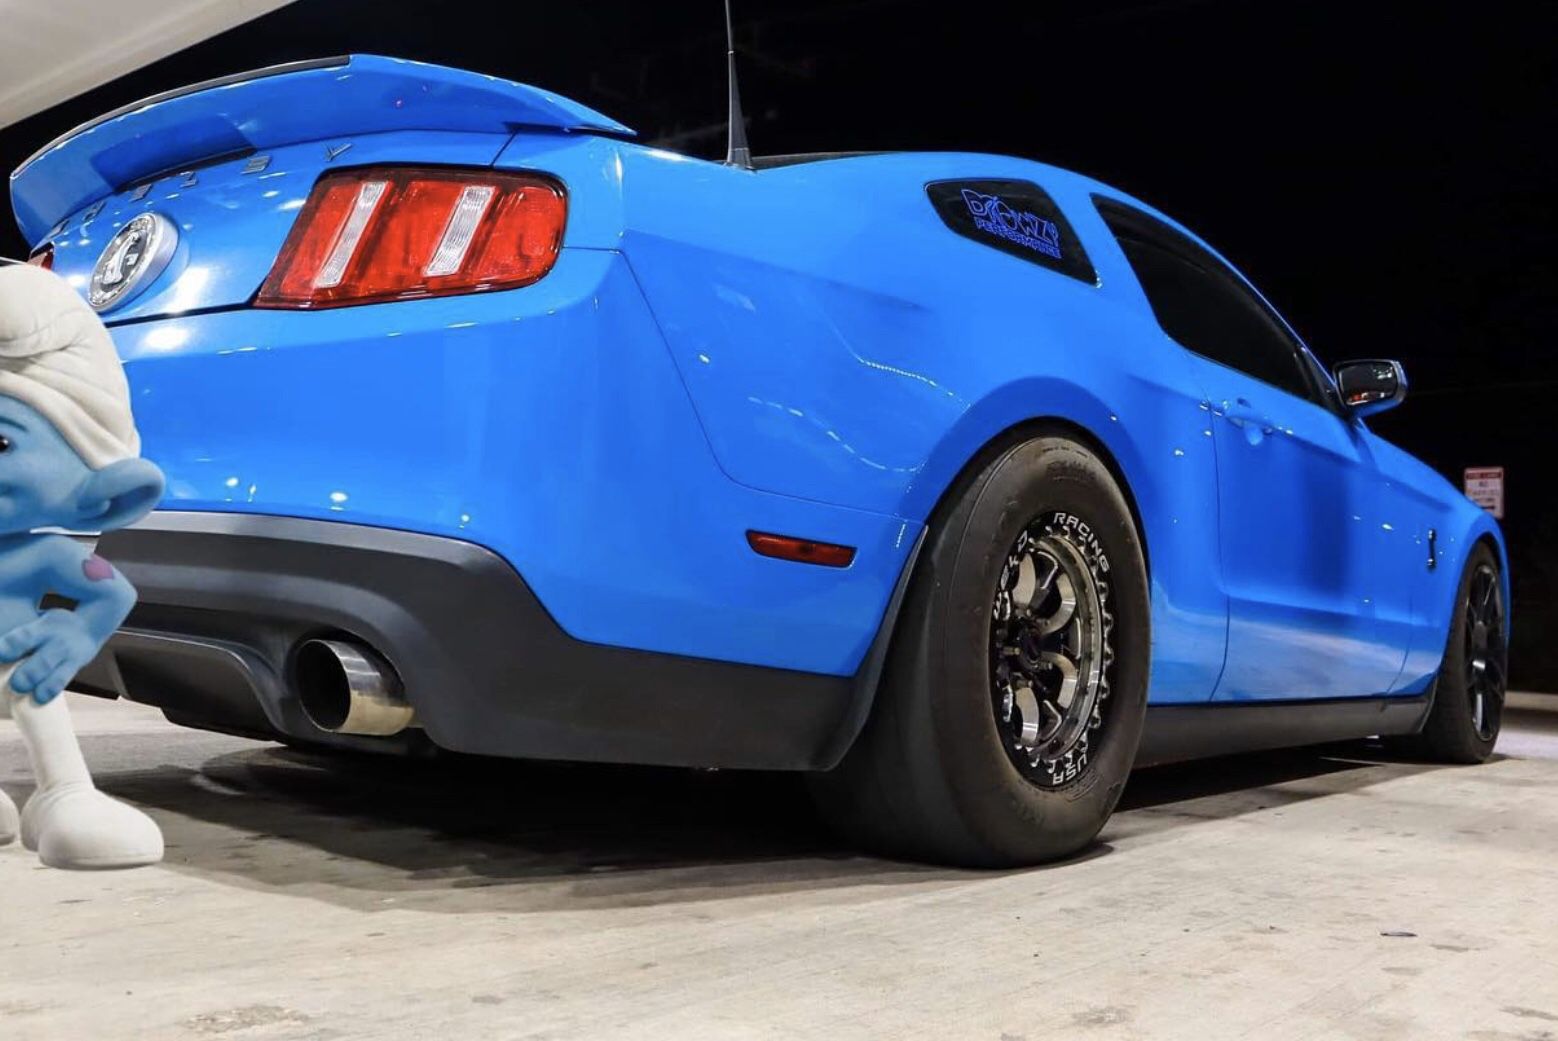 2011 Ford Shelby GT500